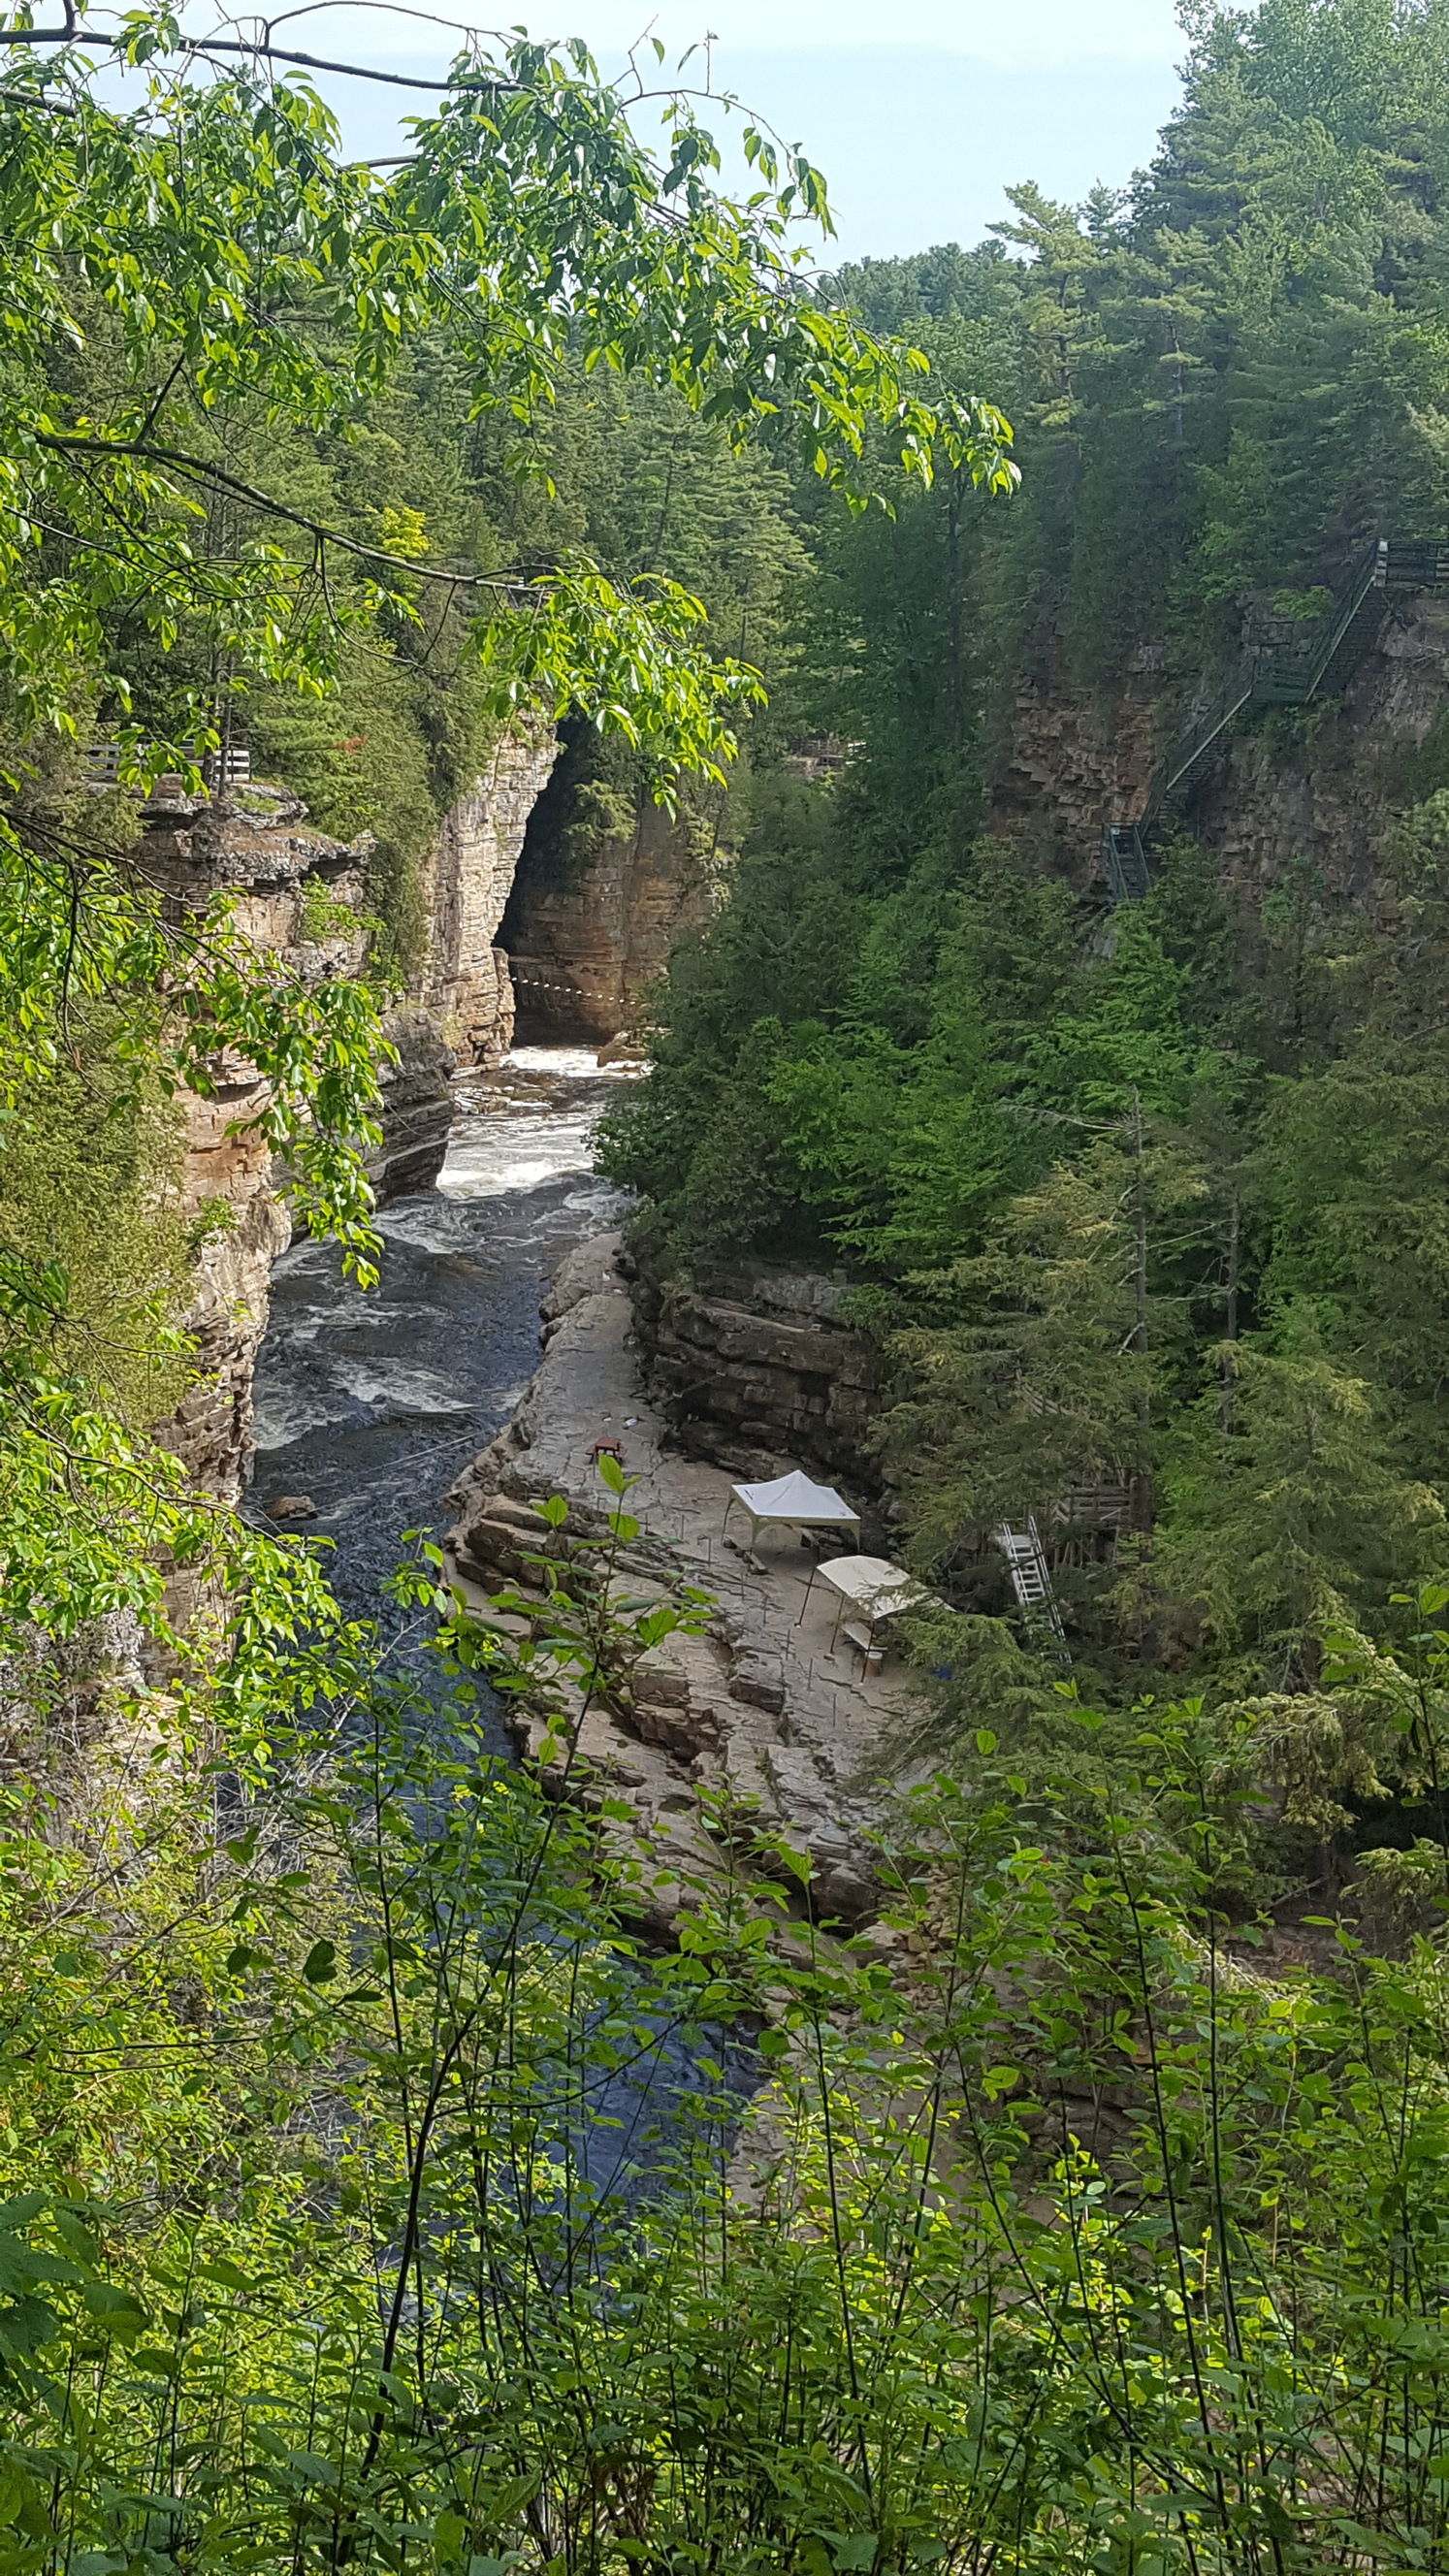 Ausable chasm